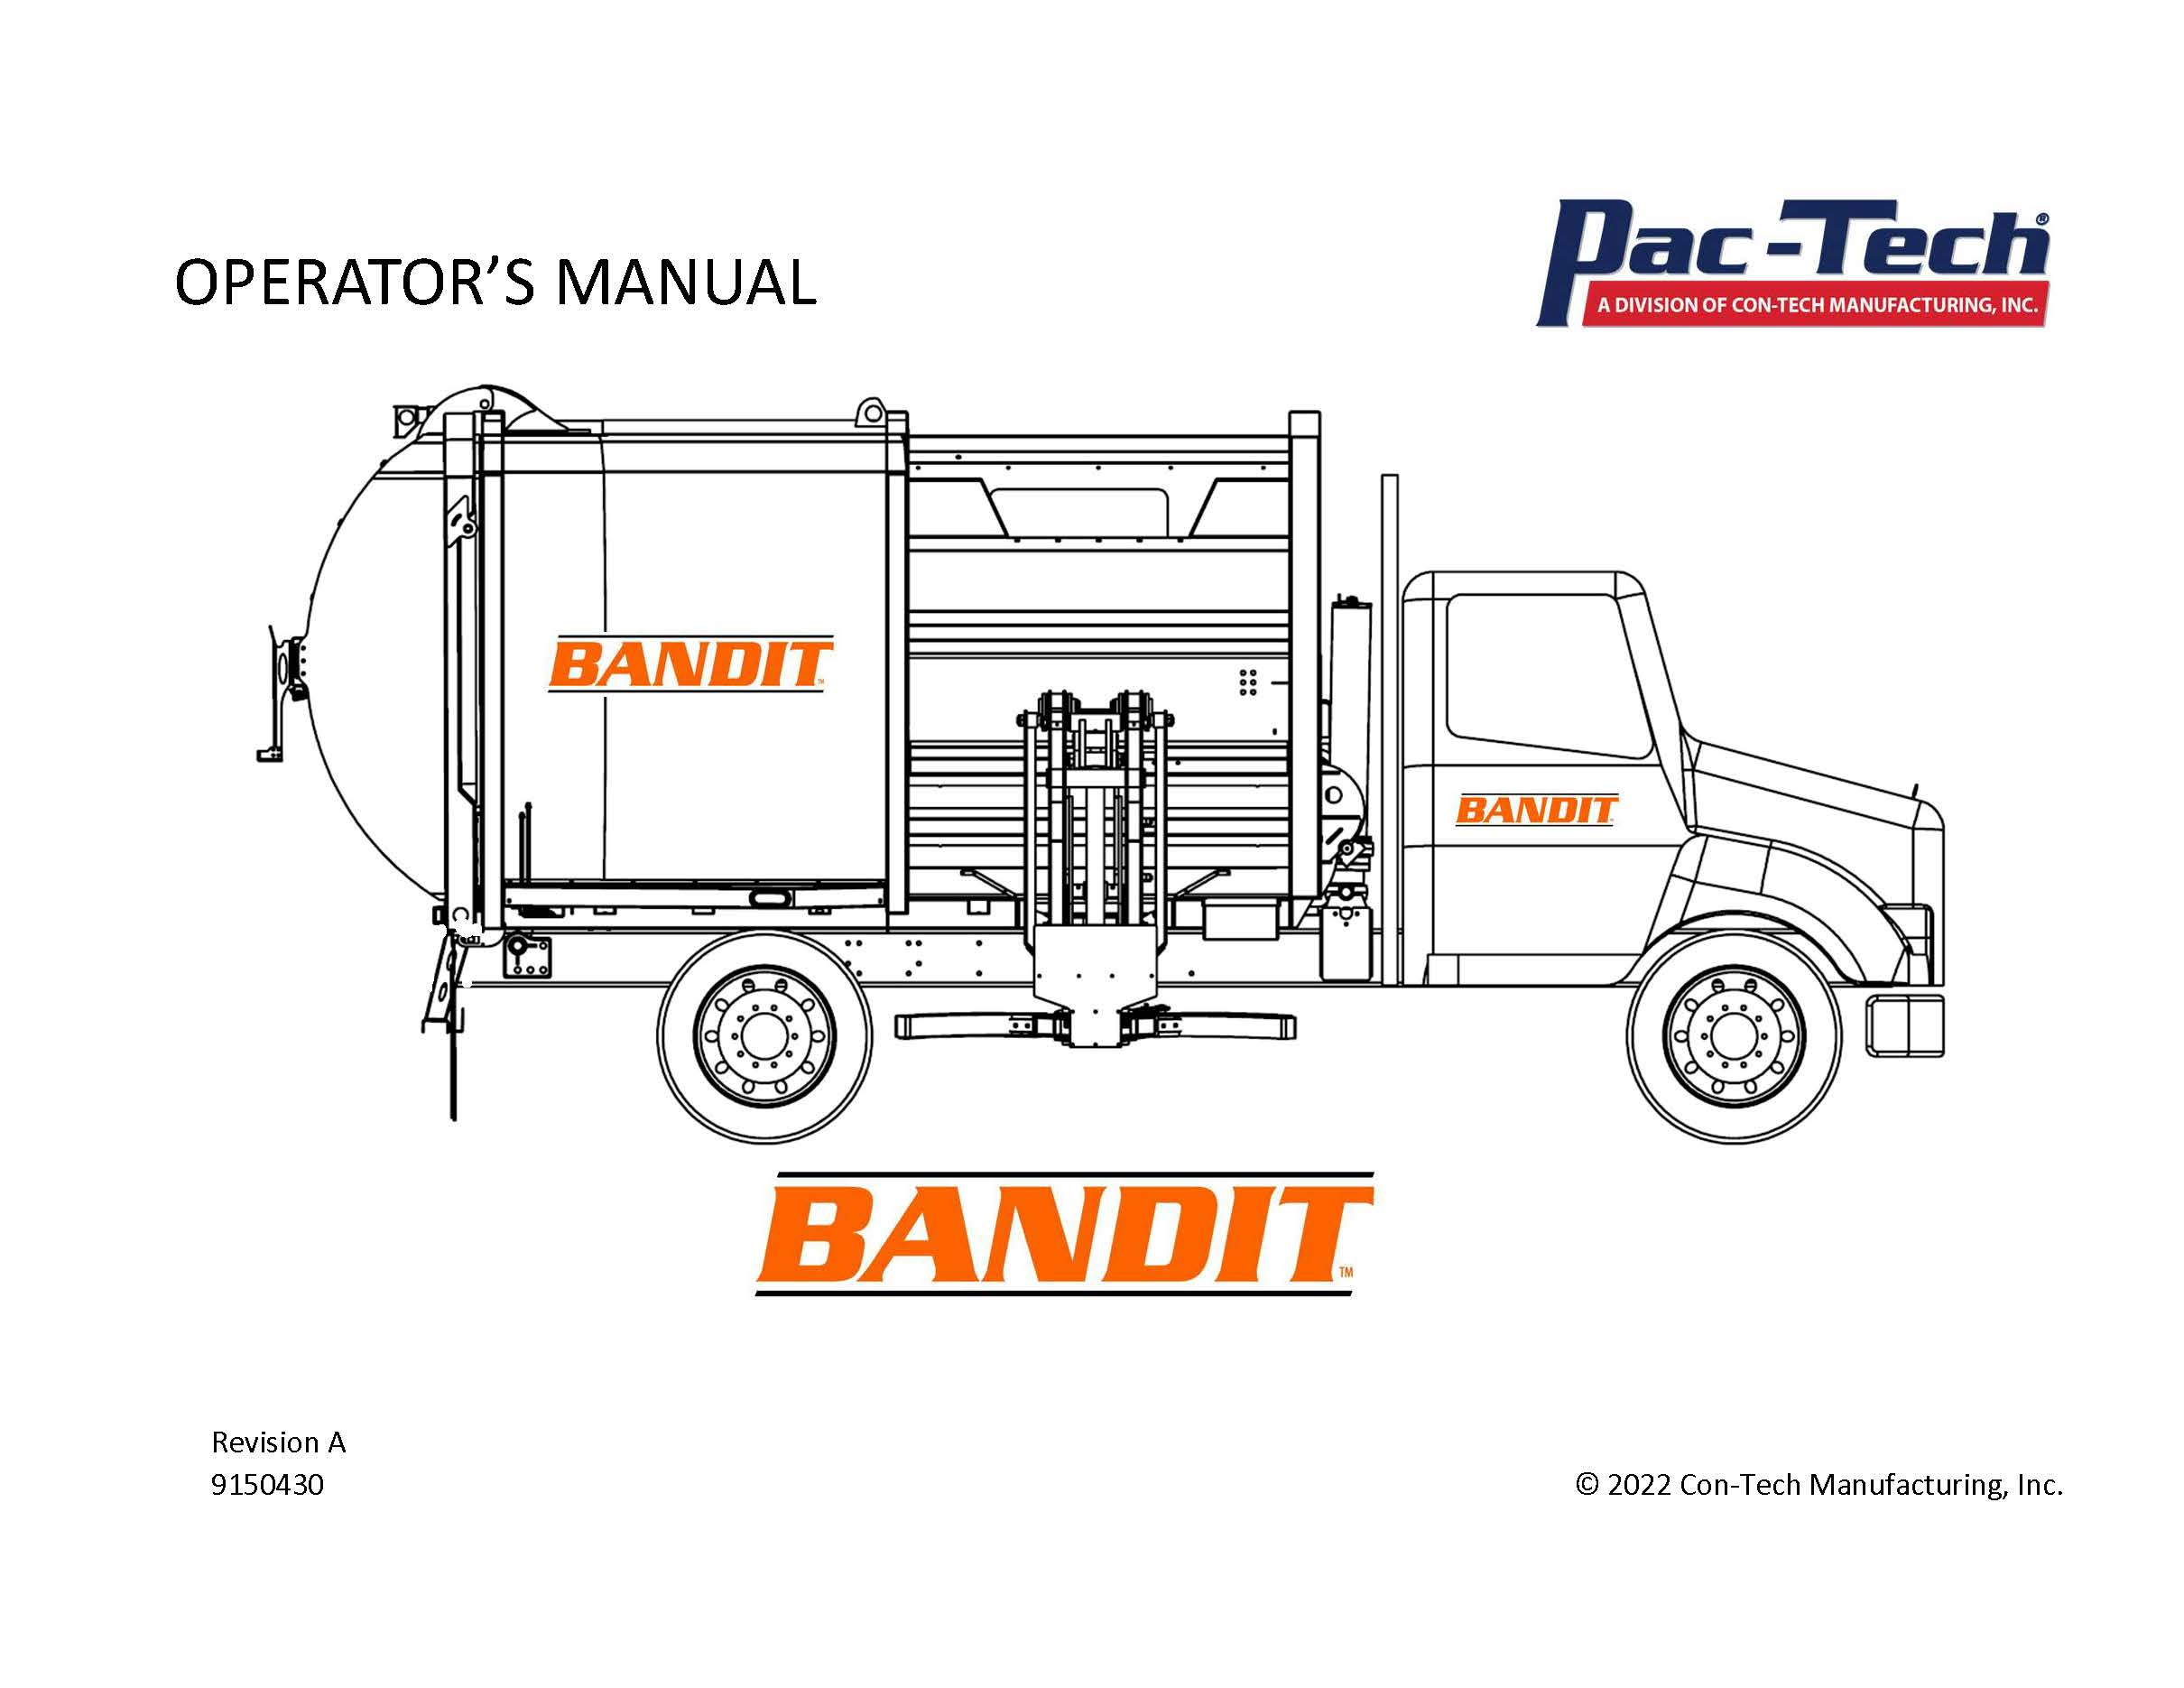 Automated Side Loader Bandit Operator's Manual